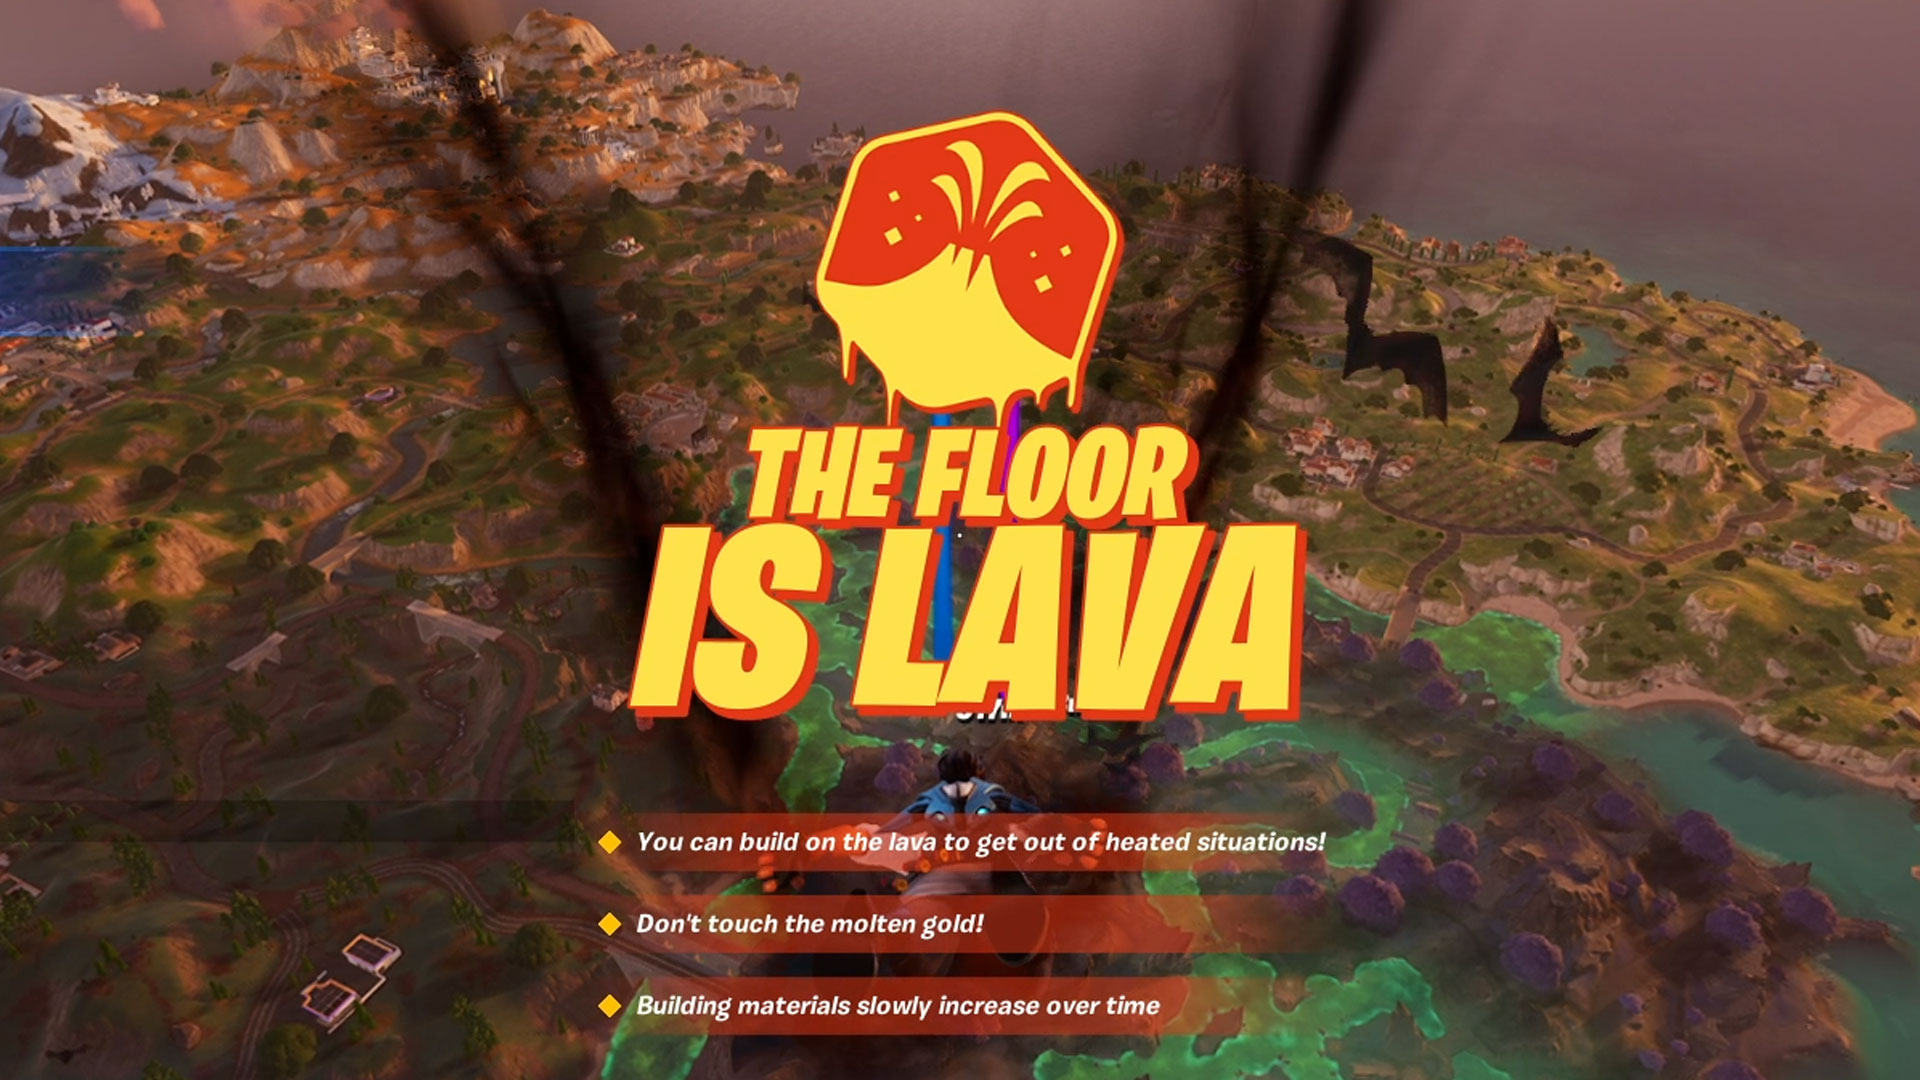 The Floor is Lava text as a player drops in Fortnite